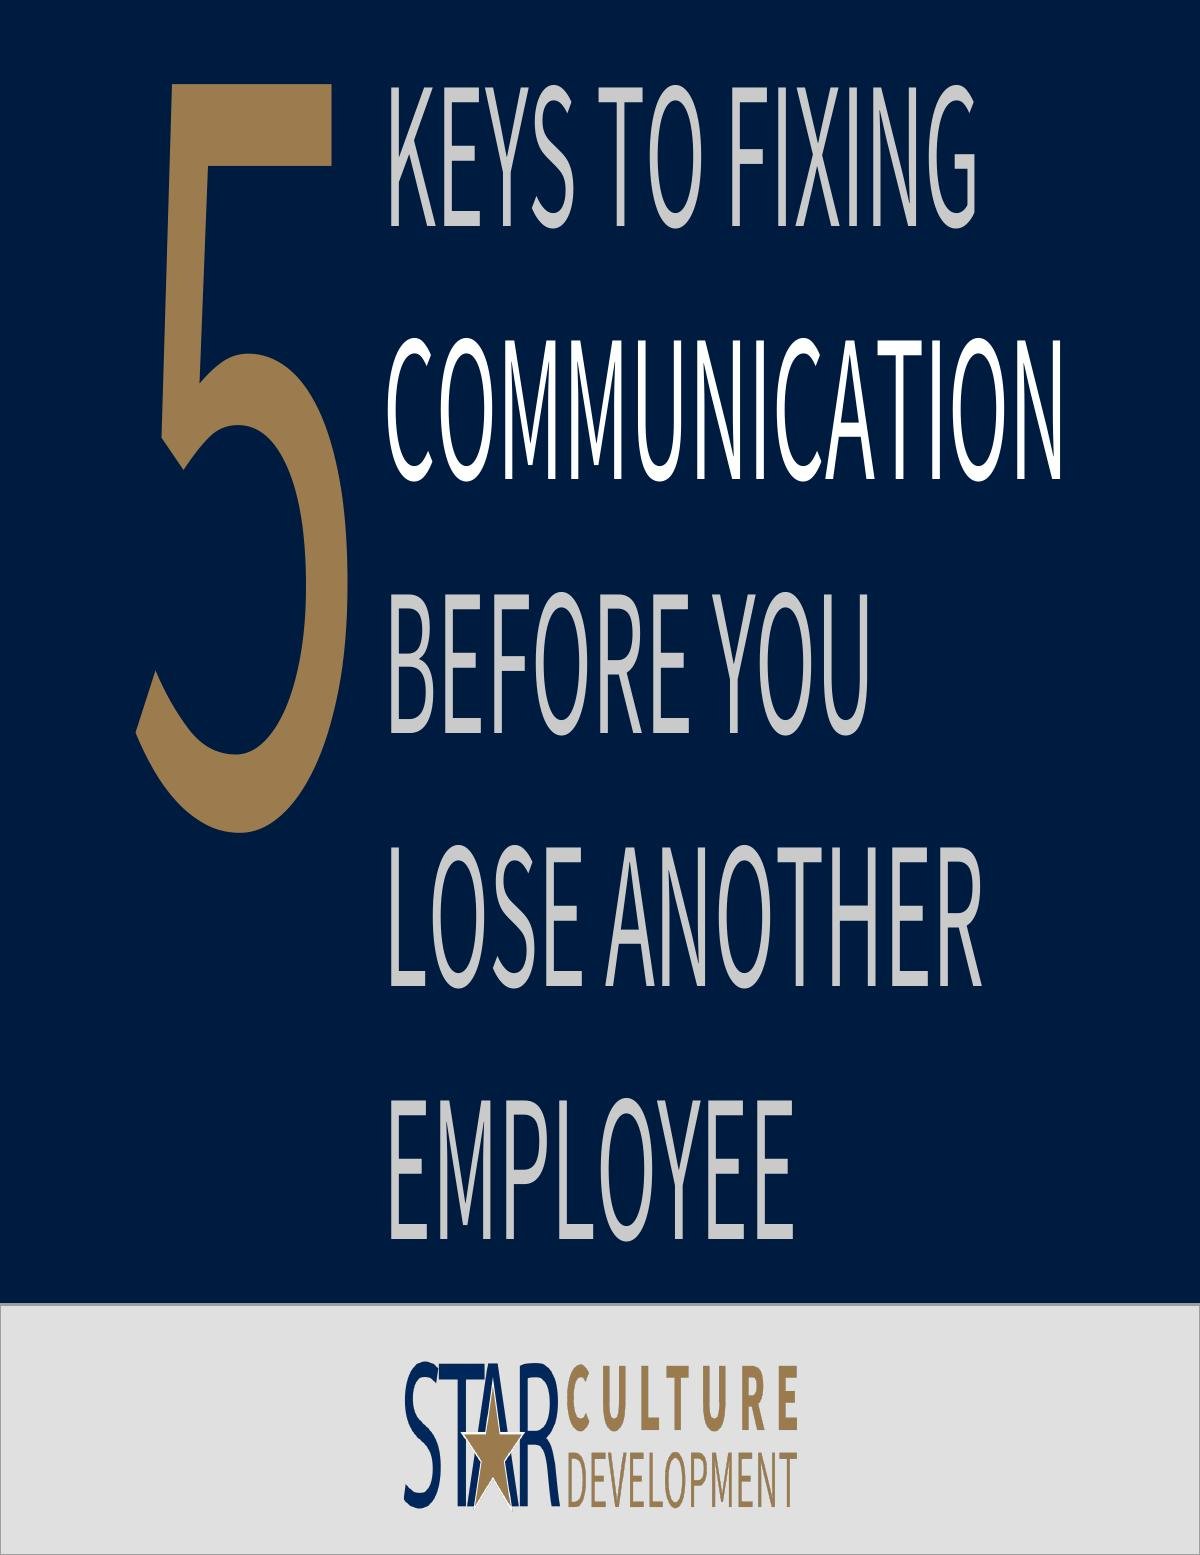 5 Keys to Fixing Communication Before You Lose ANOTHER Employee